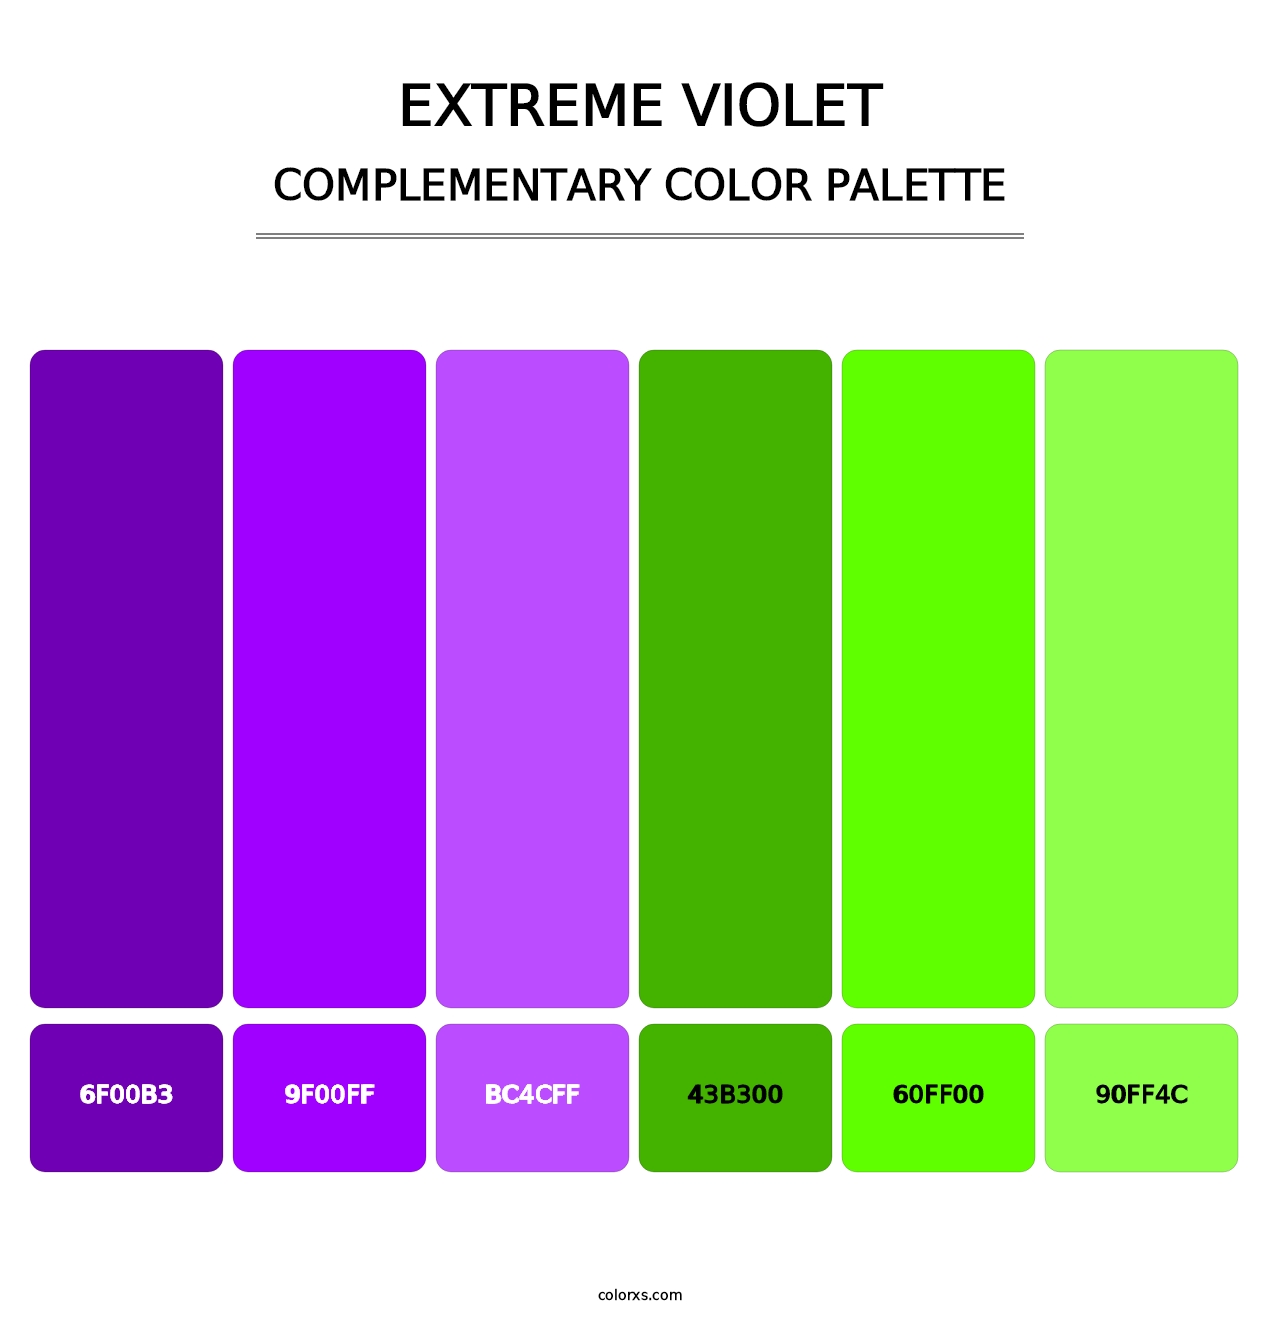 Extreme Violet - Complementary Color Palette